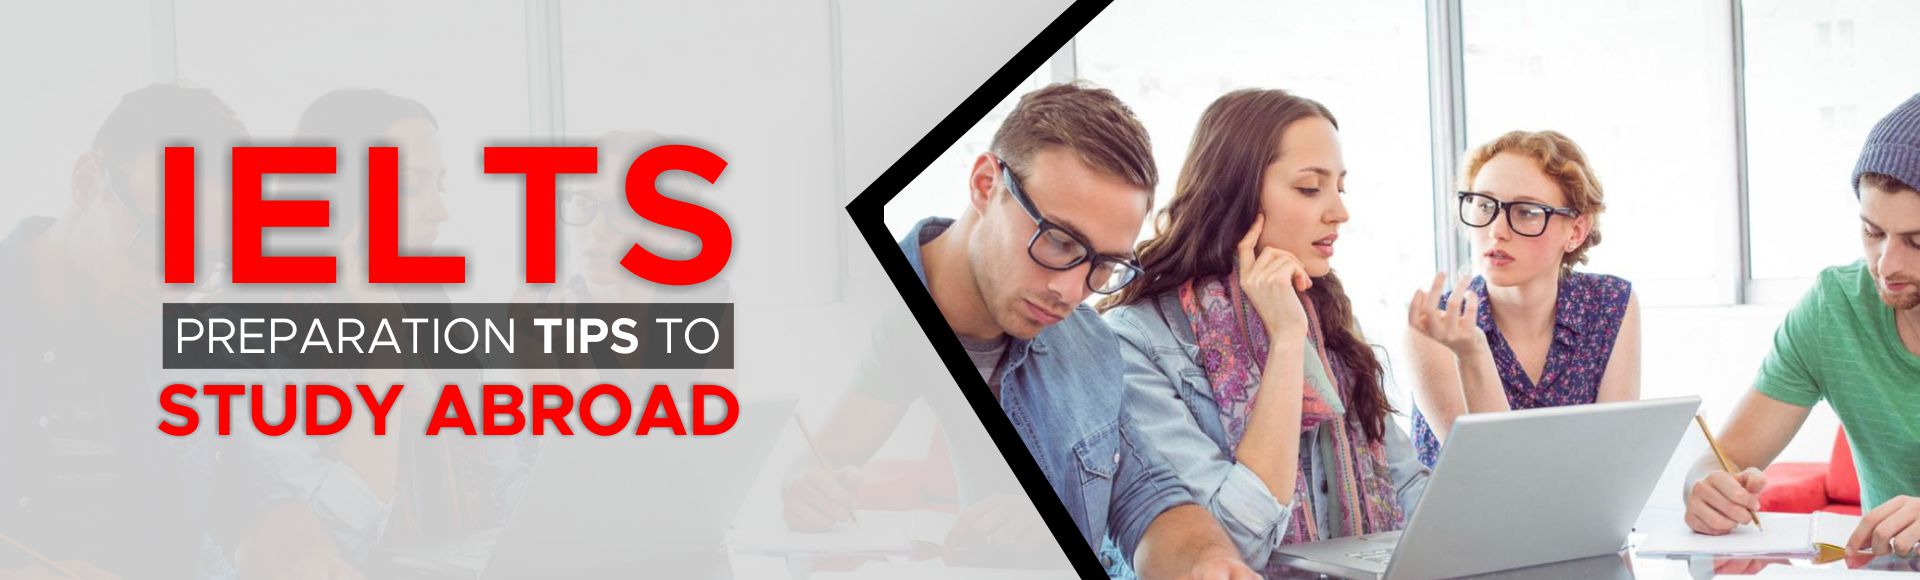 IELTS Preparation Tips to Study Abroad